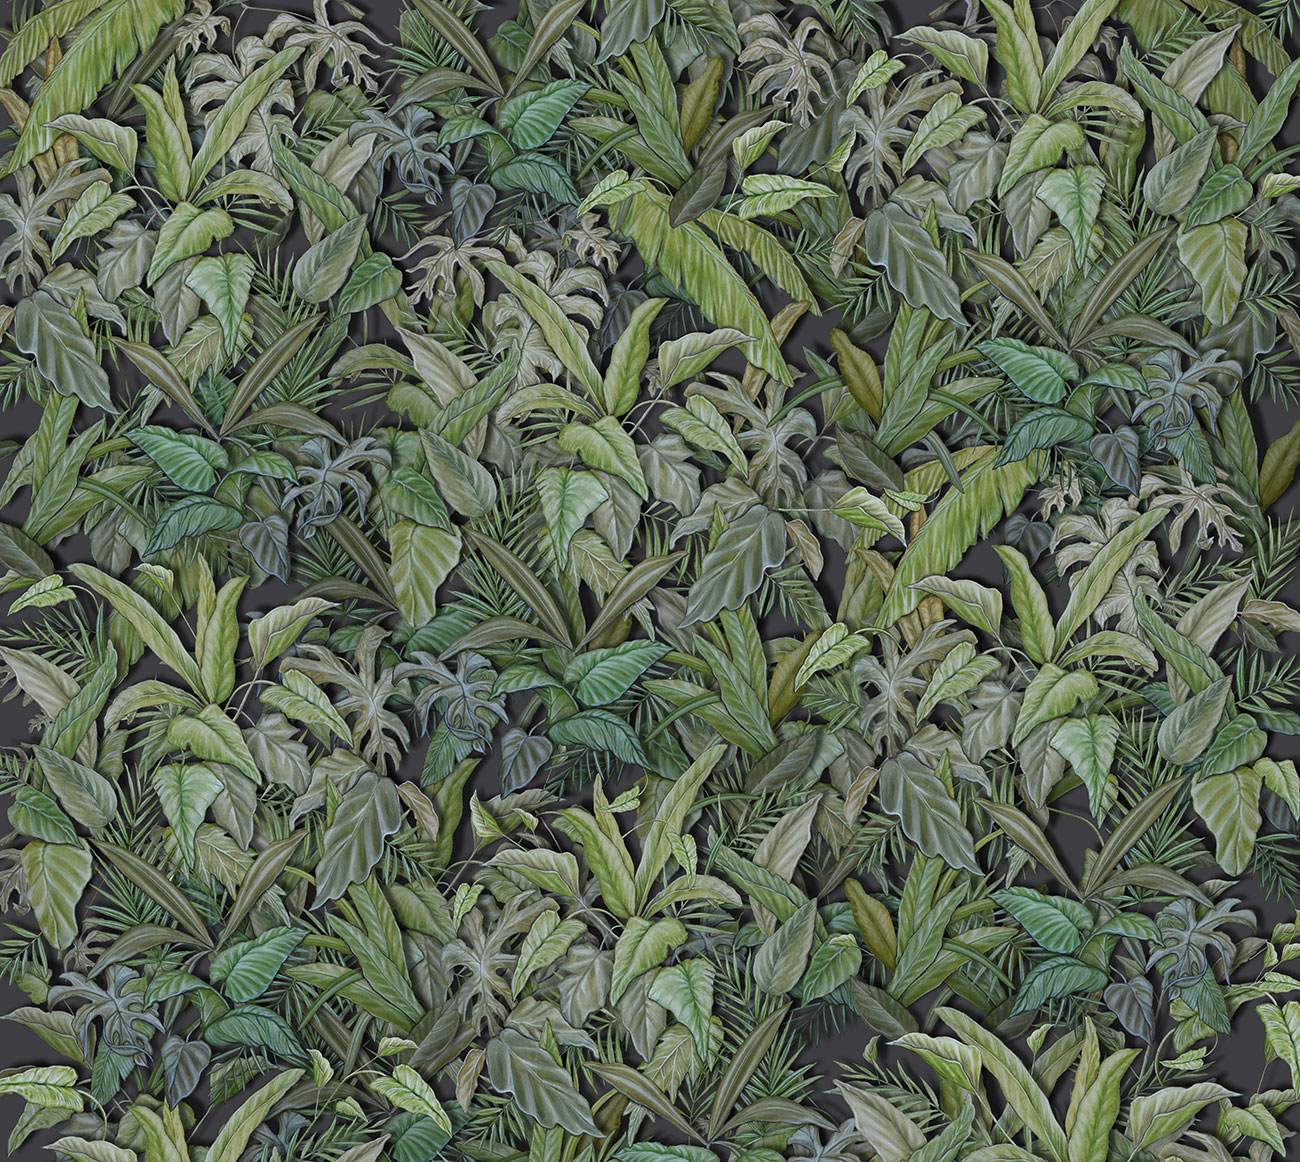 Tropical wallpaper, 3d effect with composition of exotic leaves with various green tones